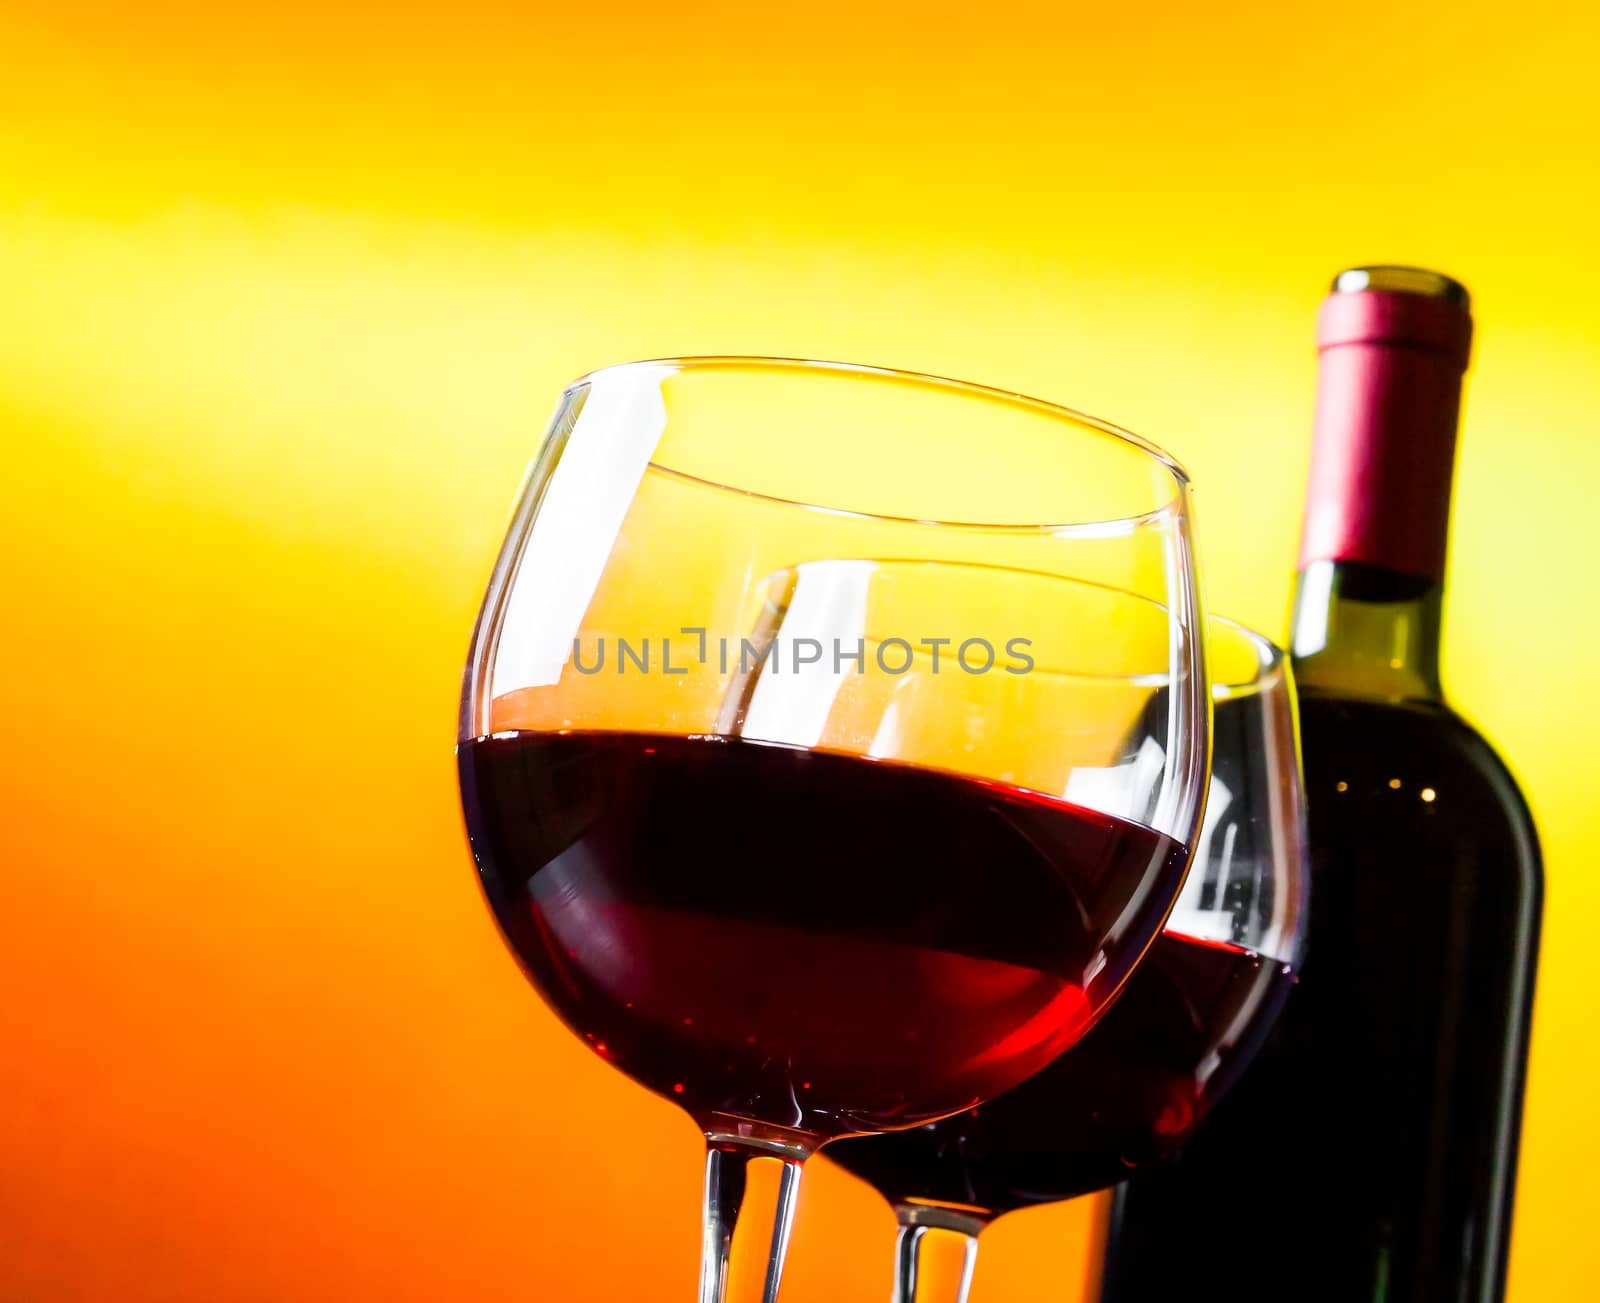 two red wine glasses near the bottle against golden lights background, festive and fun concept